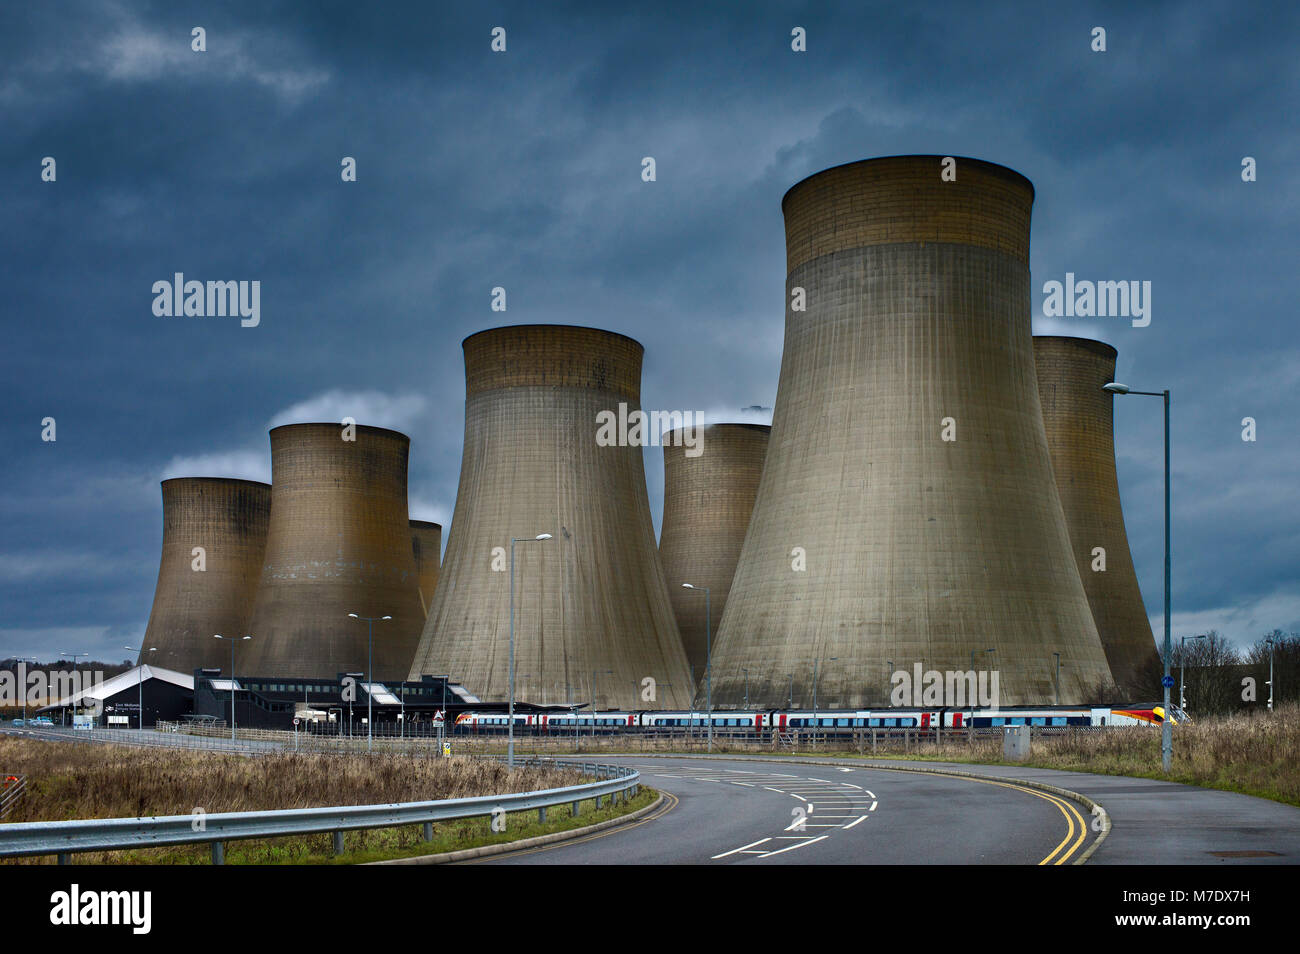 Ratcliffe-on-Soar is one of the most efficient coal fired power stations in the UK, with a total generation capacity of 2,000MW from four 500MW units, Stock Photo